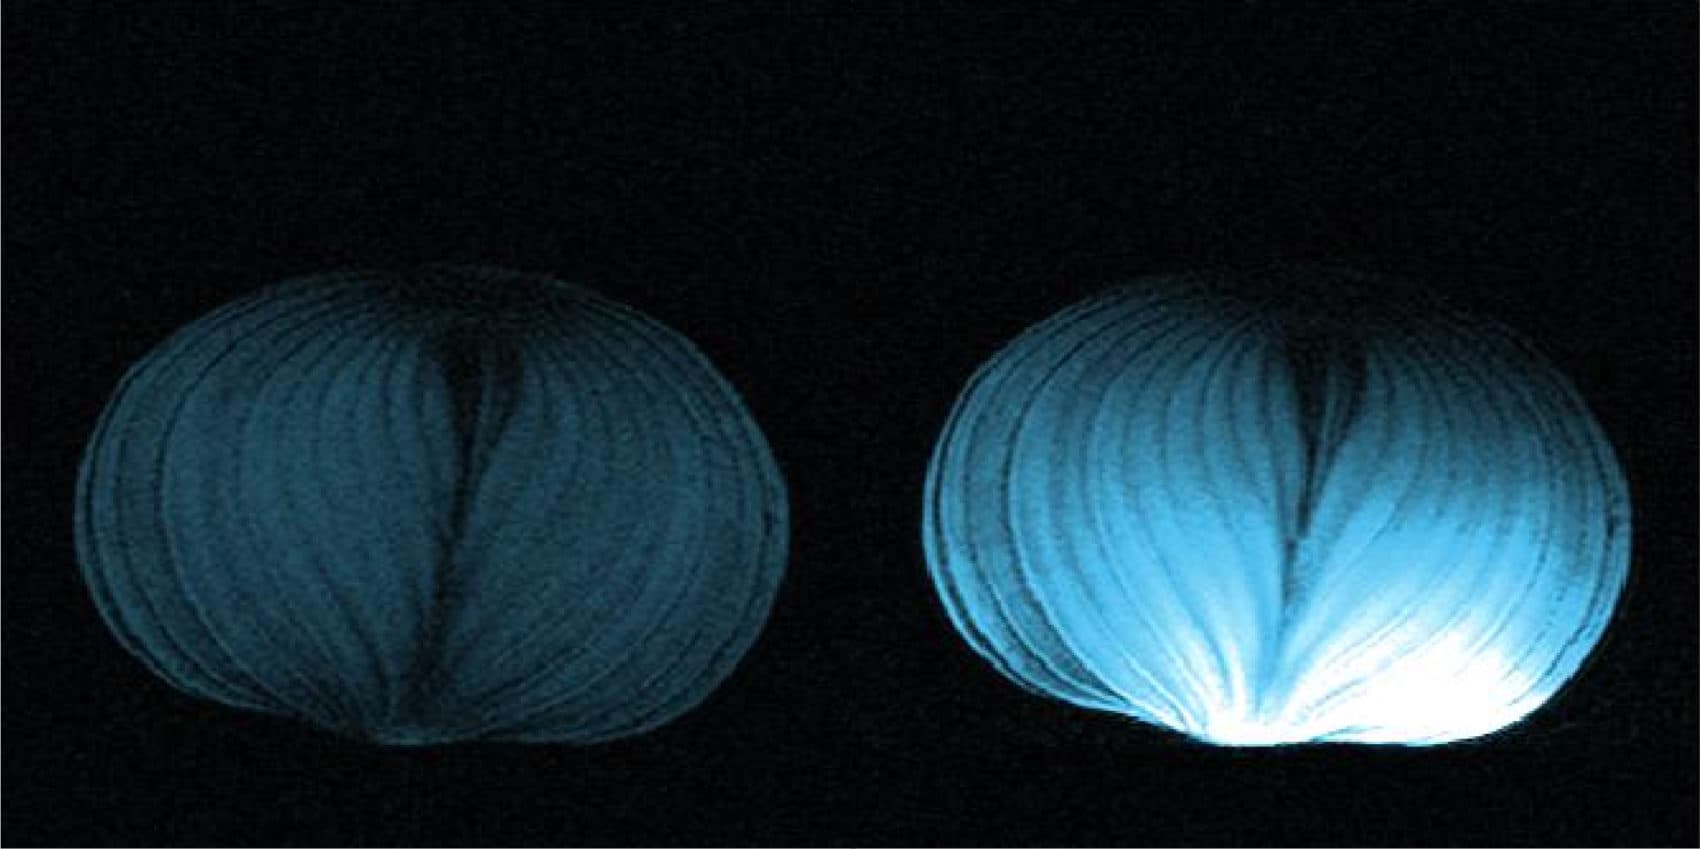 A comparison of two MRI images. The onion on the right rested on top of a &quot;magnetic metamaterial&quot; that enhanced the MRI signal. The onion on the  left did not have the signal boosting device. (Courtesy of Xin Zhang)